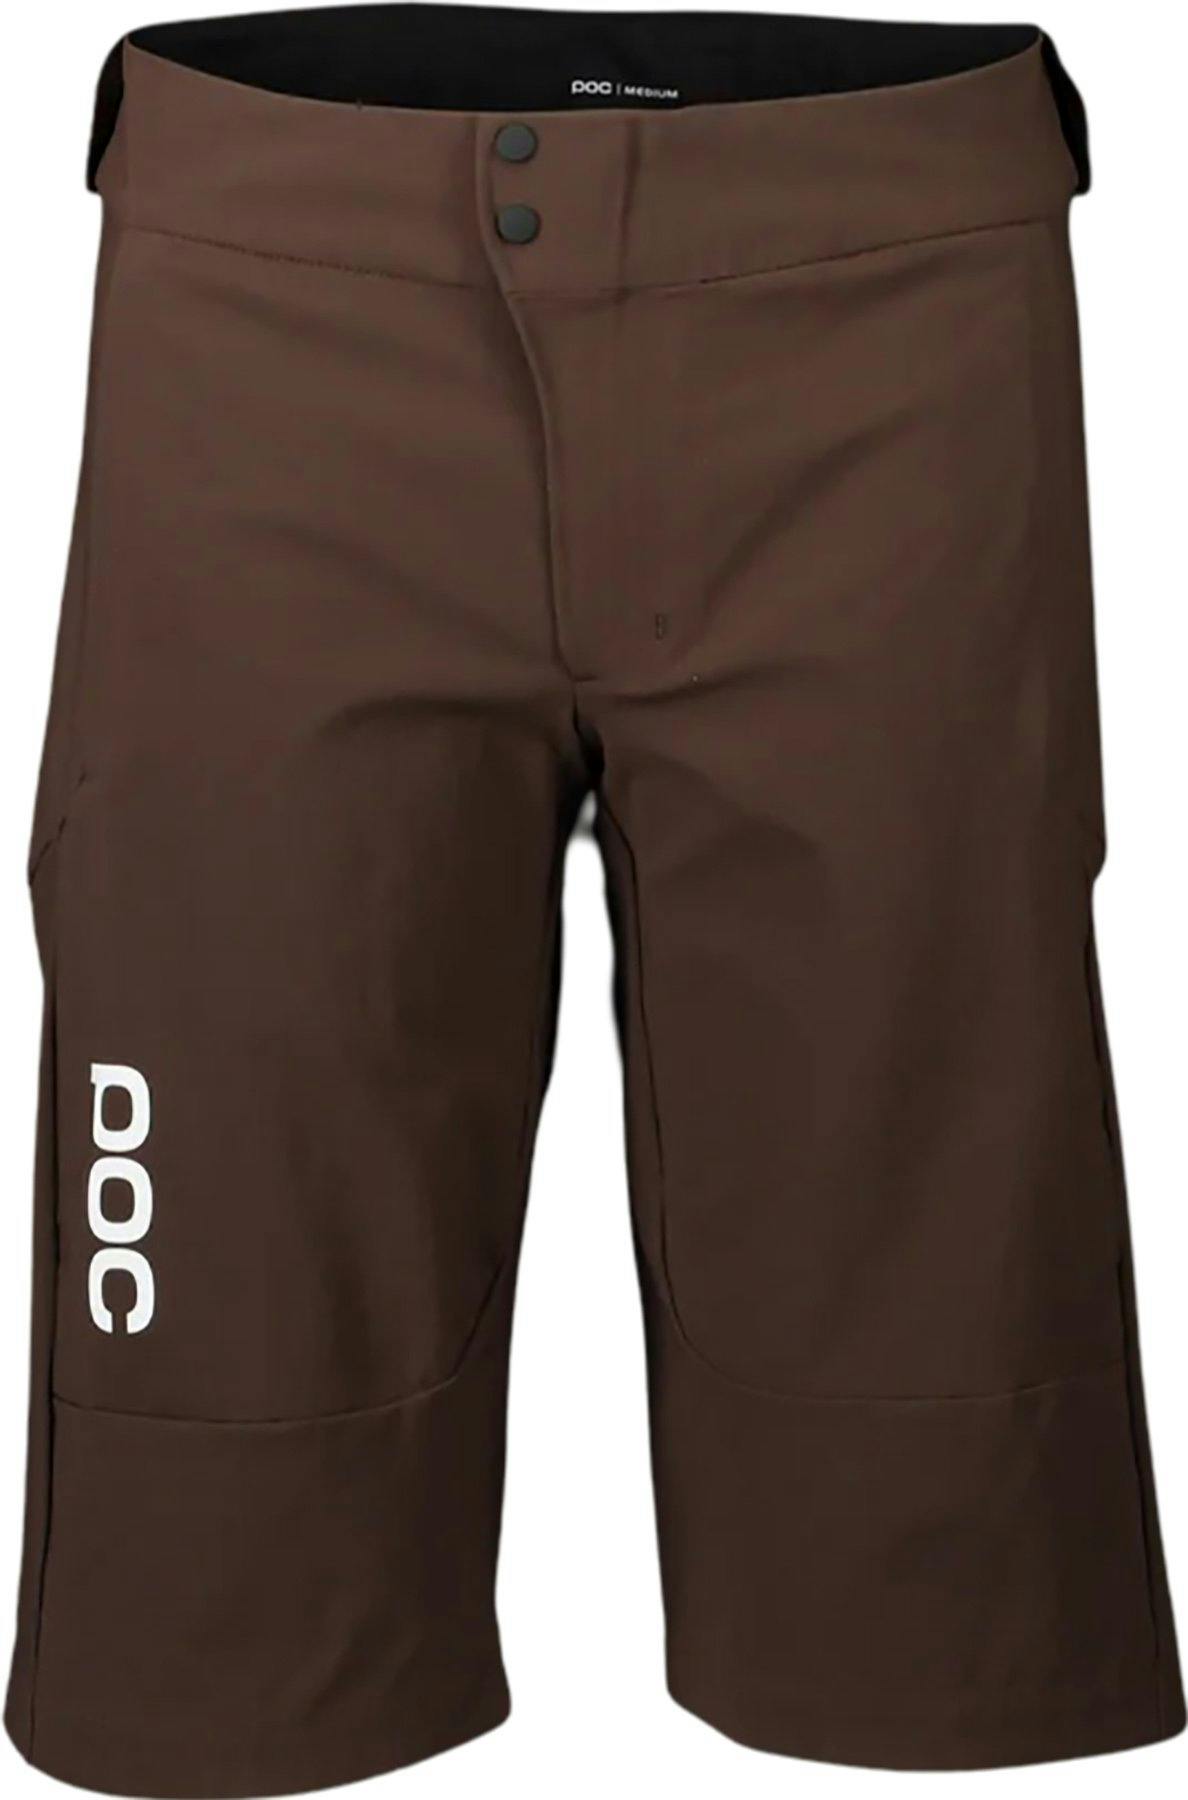 Product image for Essential MTB Shorts - Women's